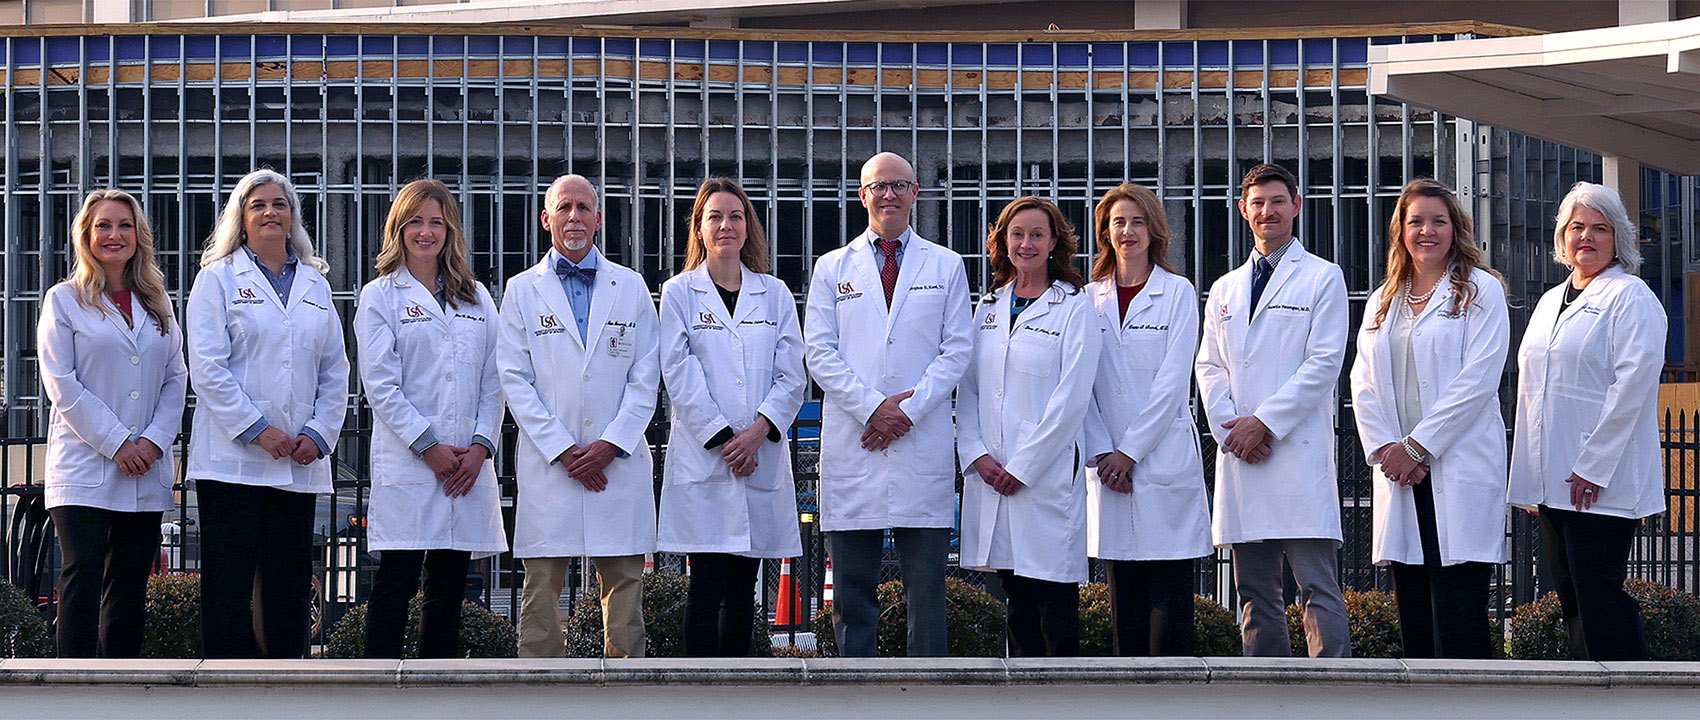 The faculty of the USA Department of Urology stand in front of USA Health University Hospital.